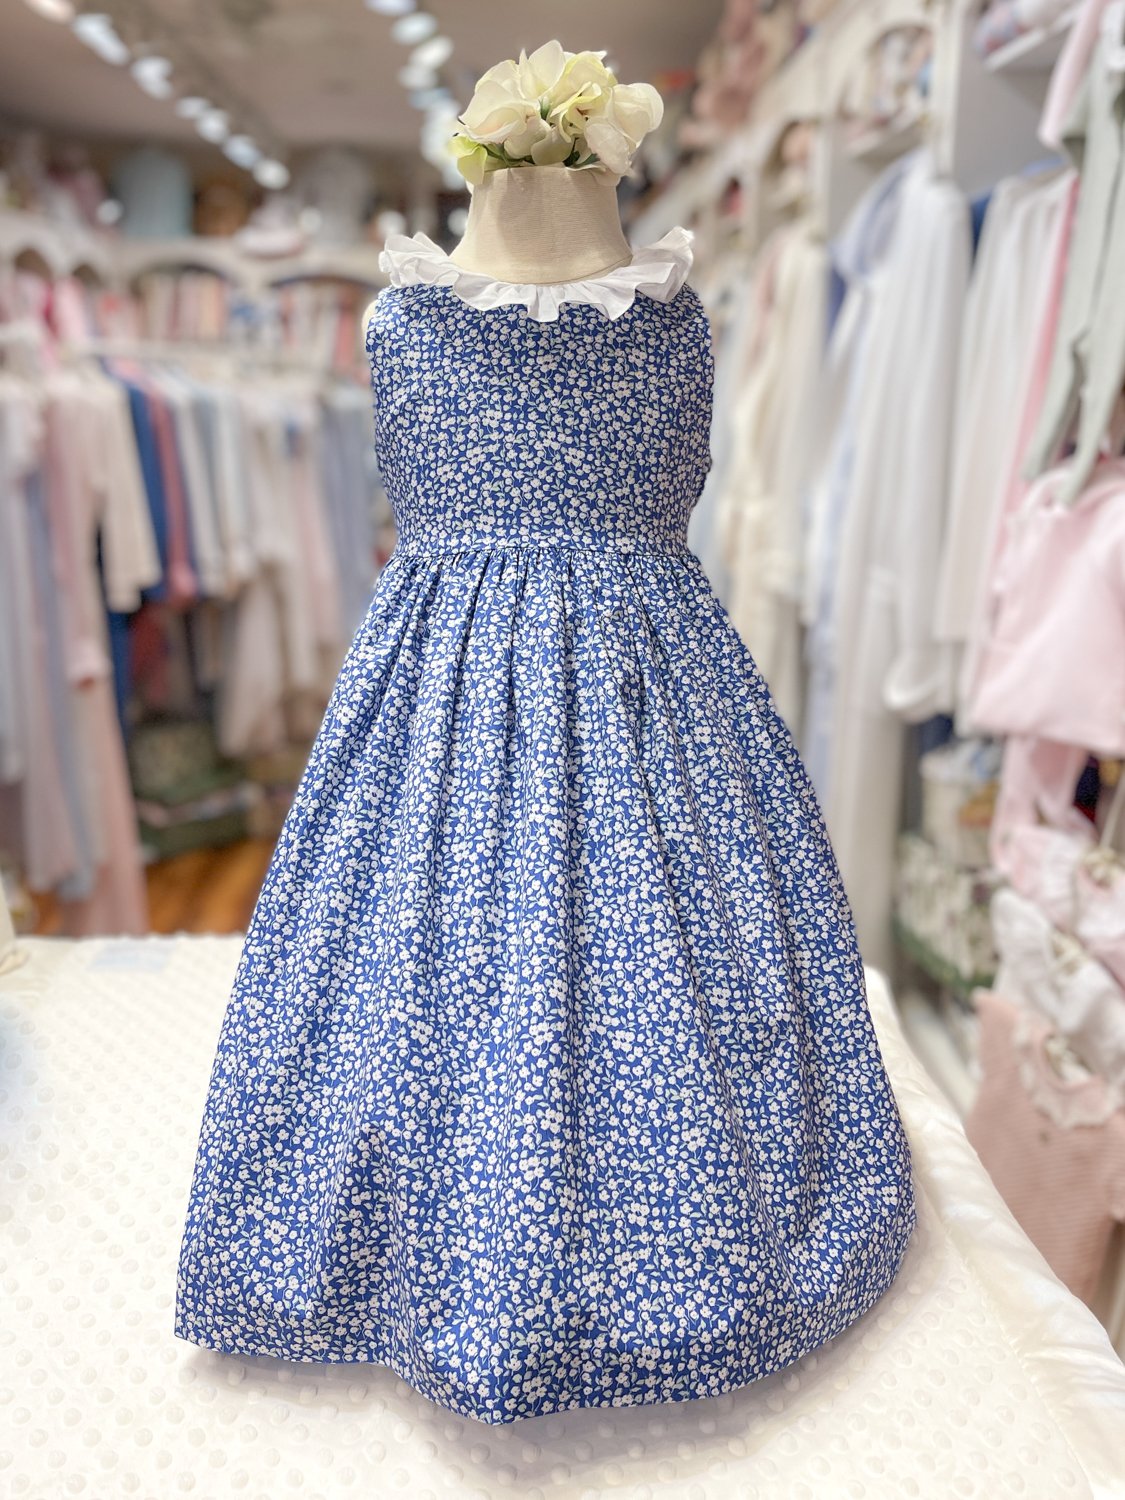 Blue Tiny Floral Sleeveless Dress with White Ruffle Collar